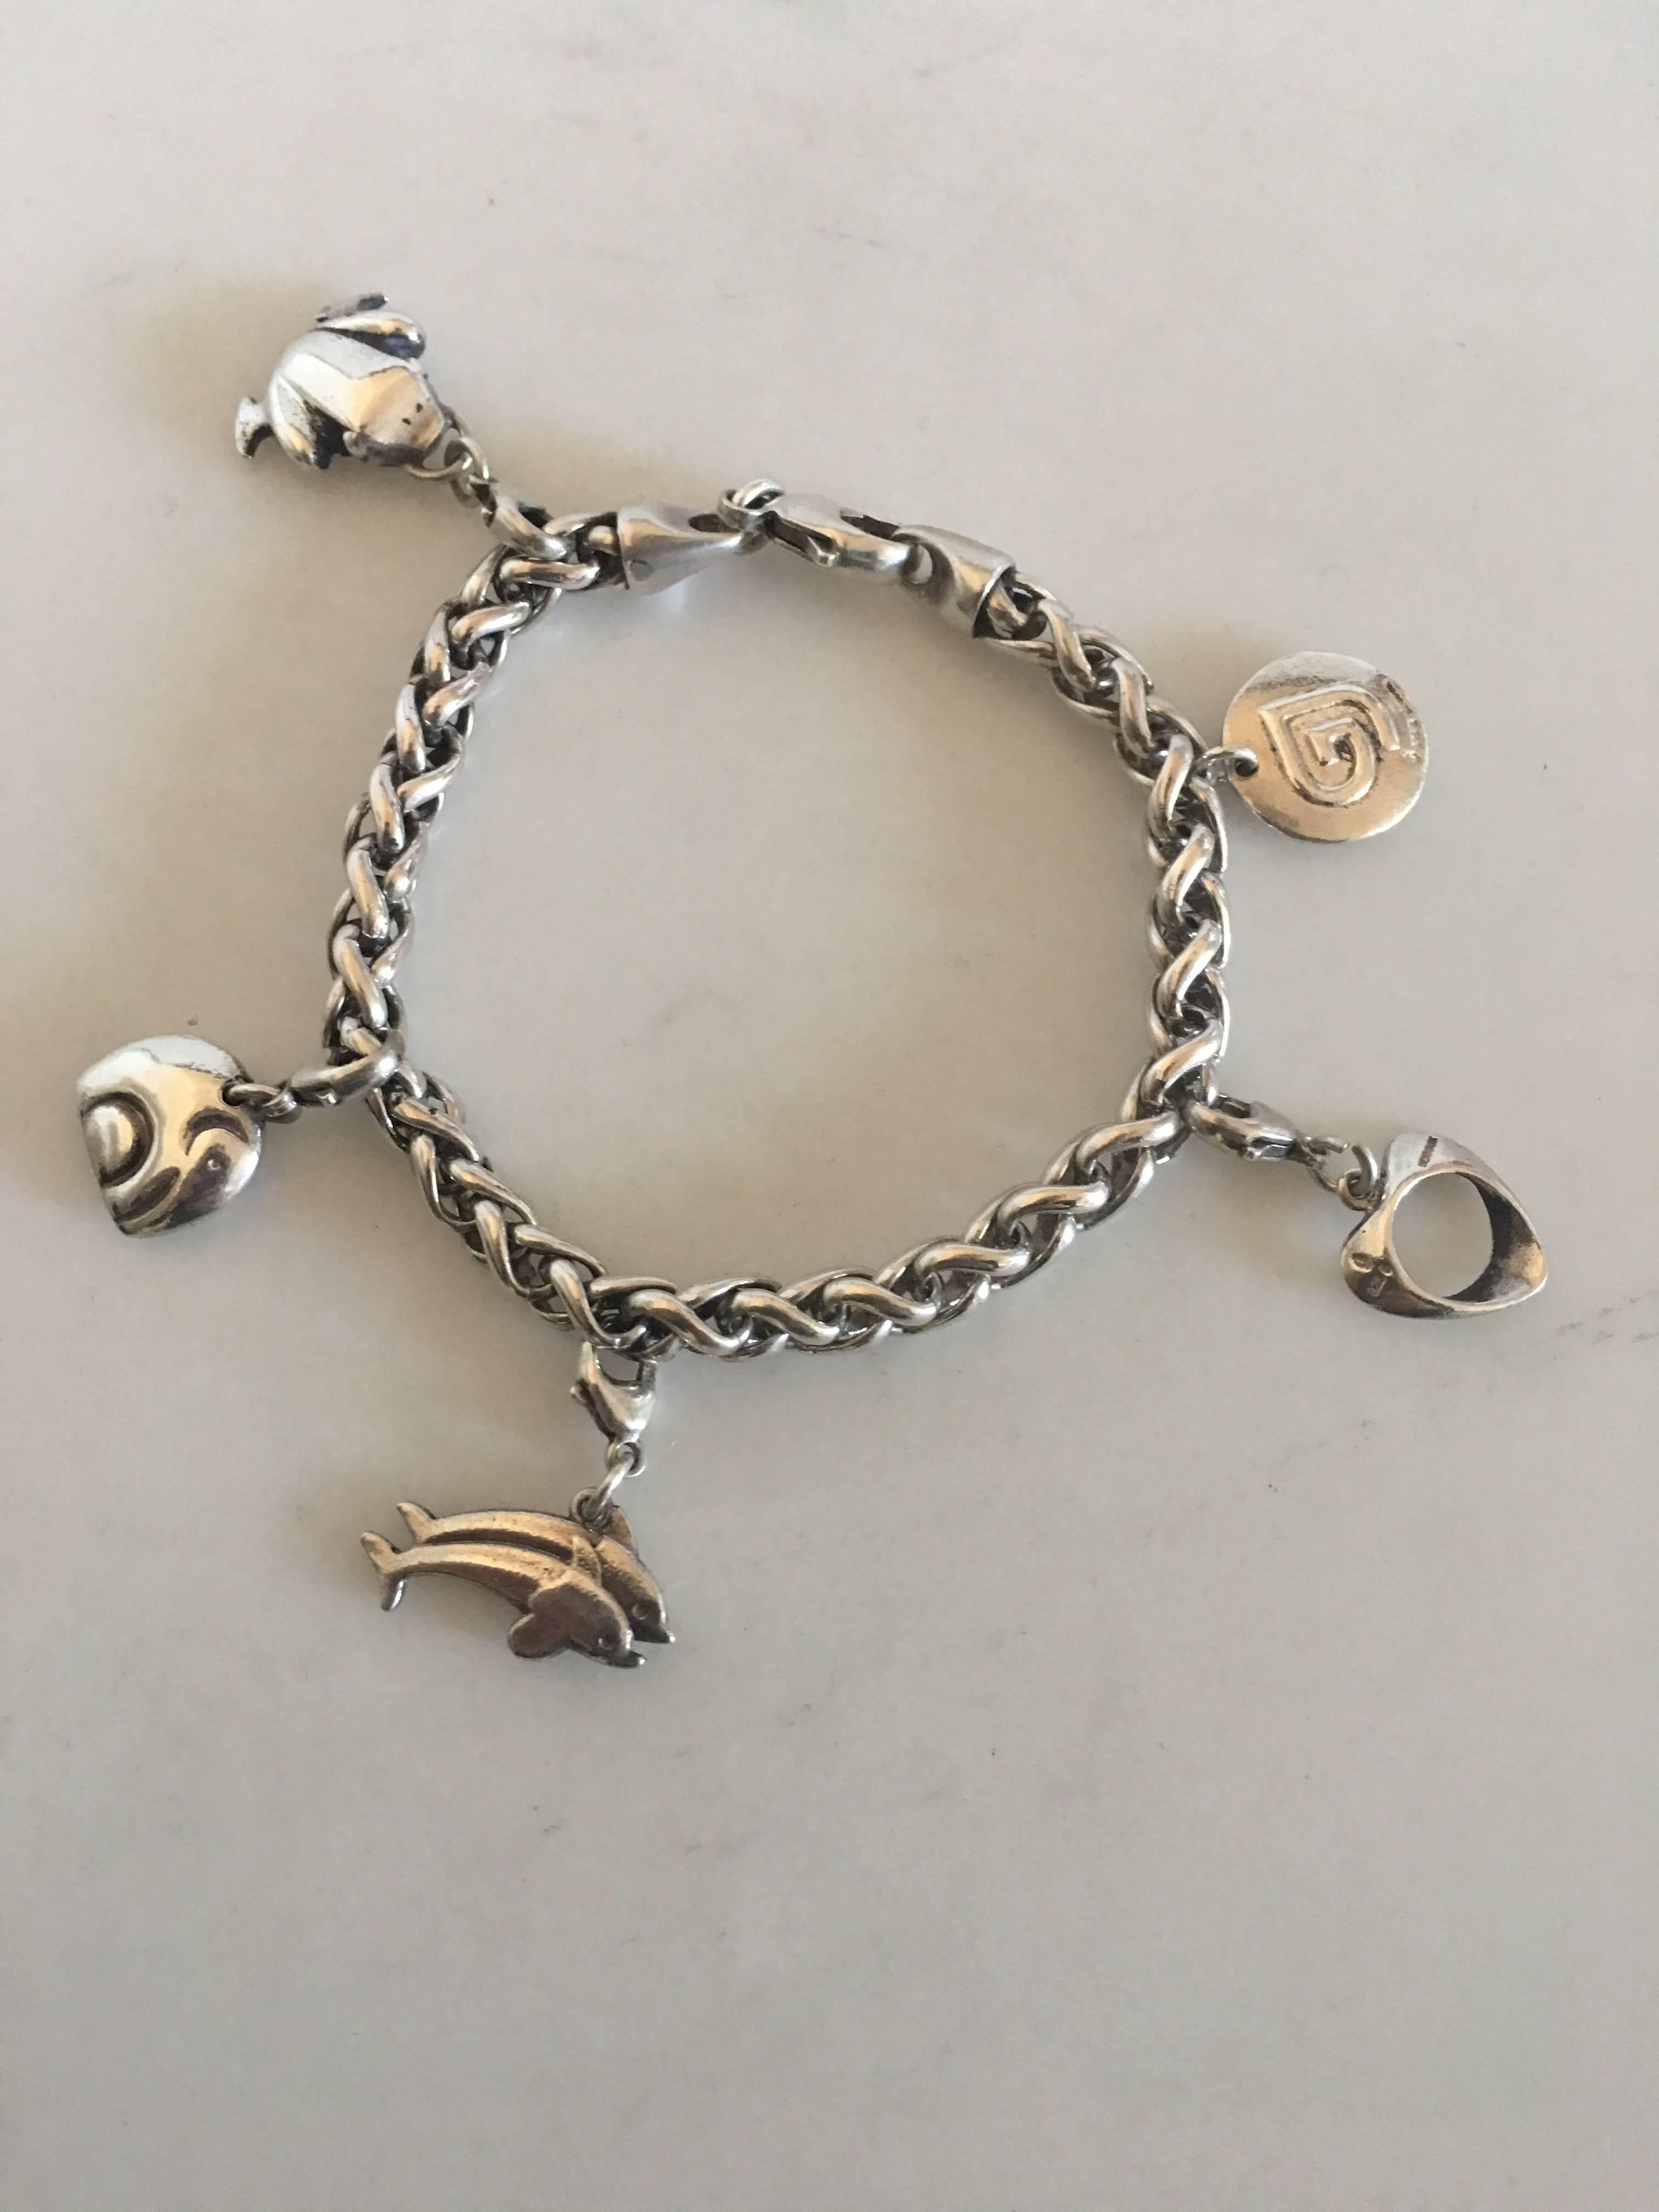 Georg Jensen Sterling Silver Charm Bracelet. With charms: Frog, Elephant, Dolphin, a Henning Koppel Heart and a Georg Jensen Charm Sign. Measures 20.5 cm L (8 5/64